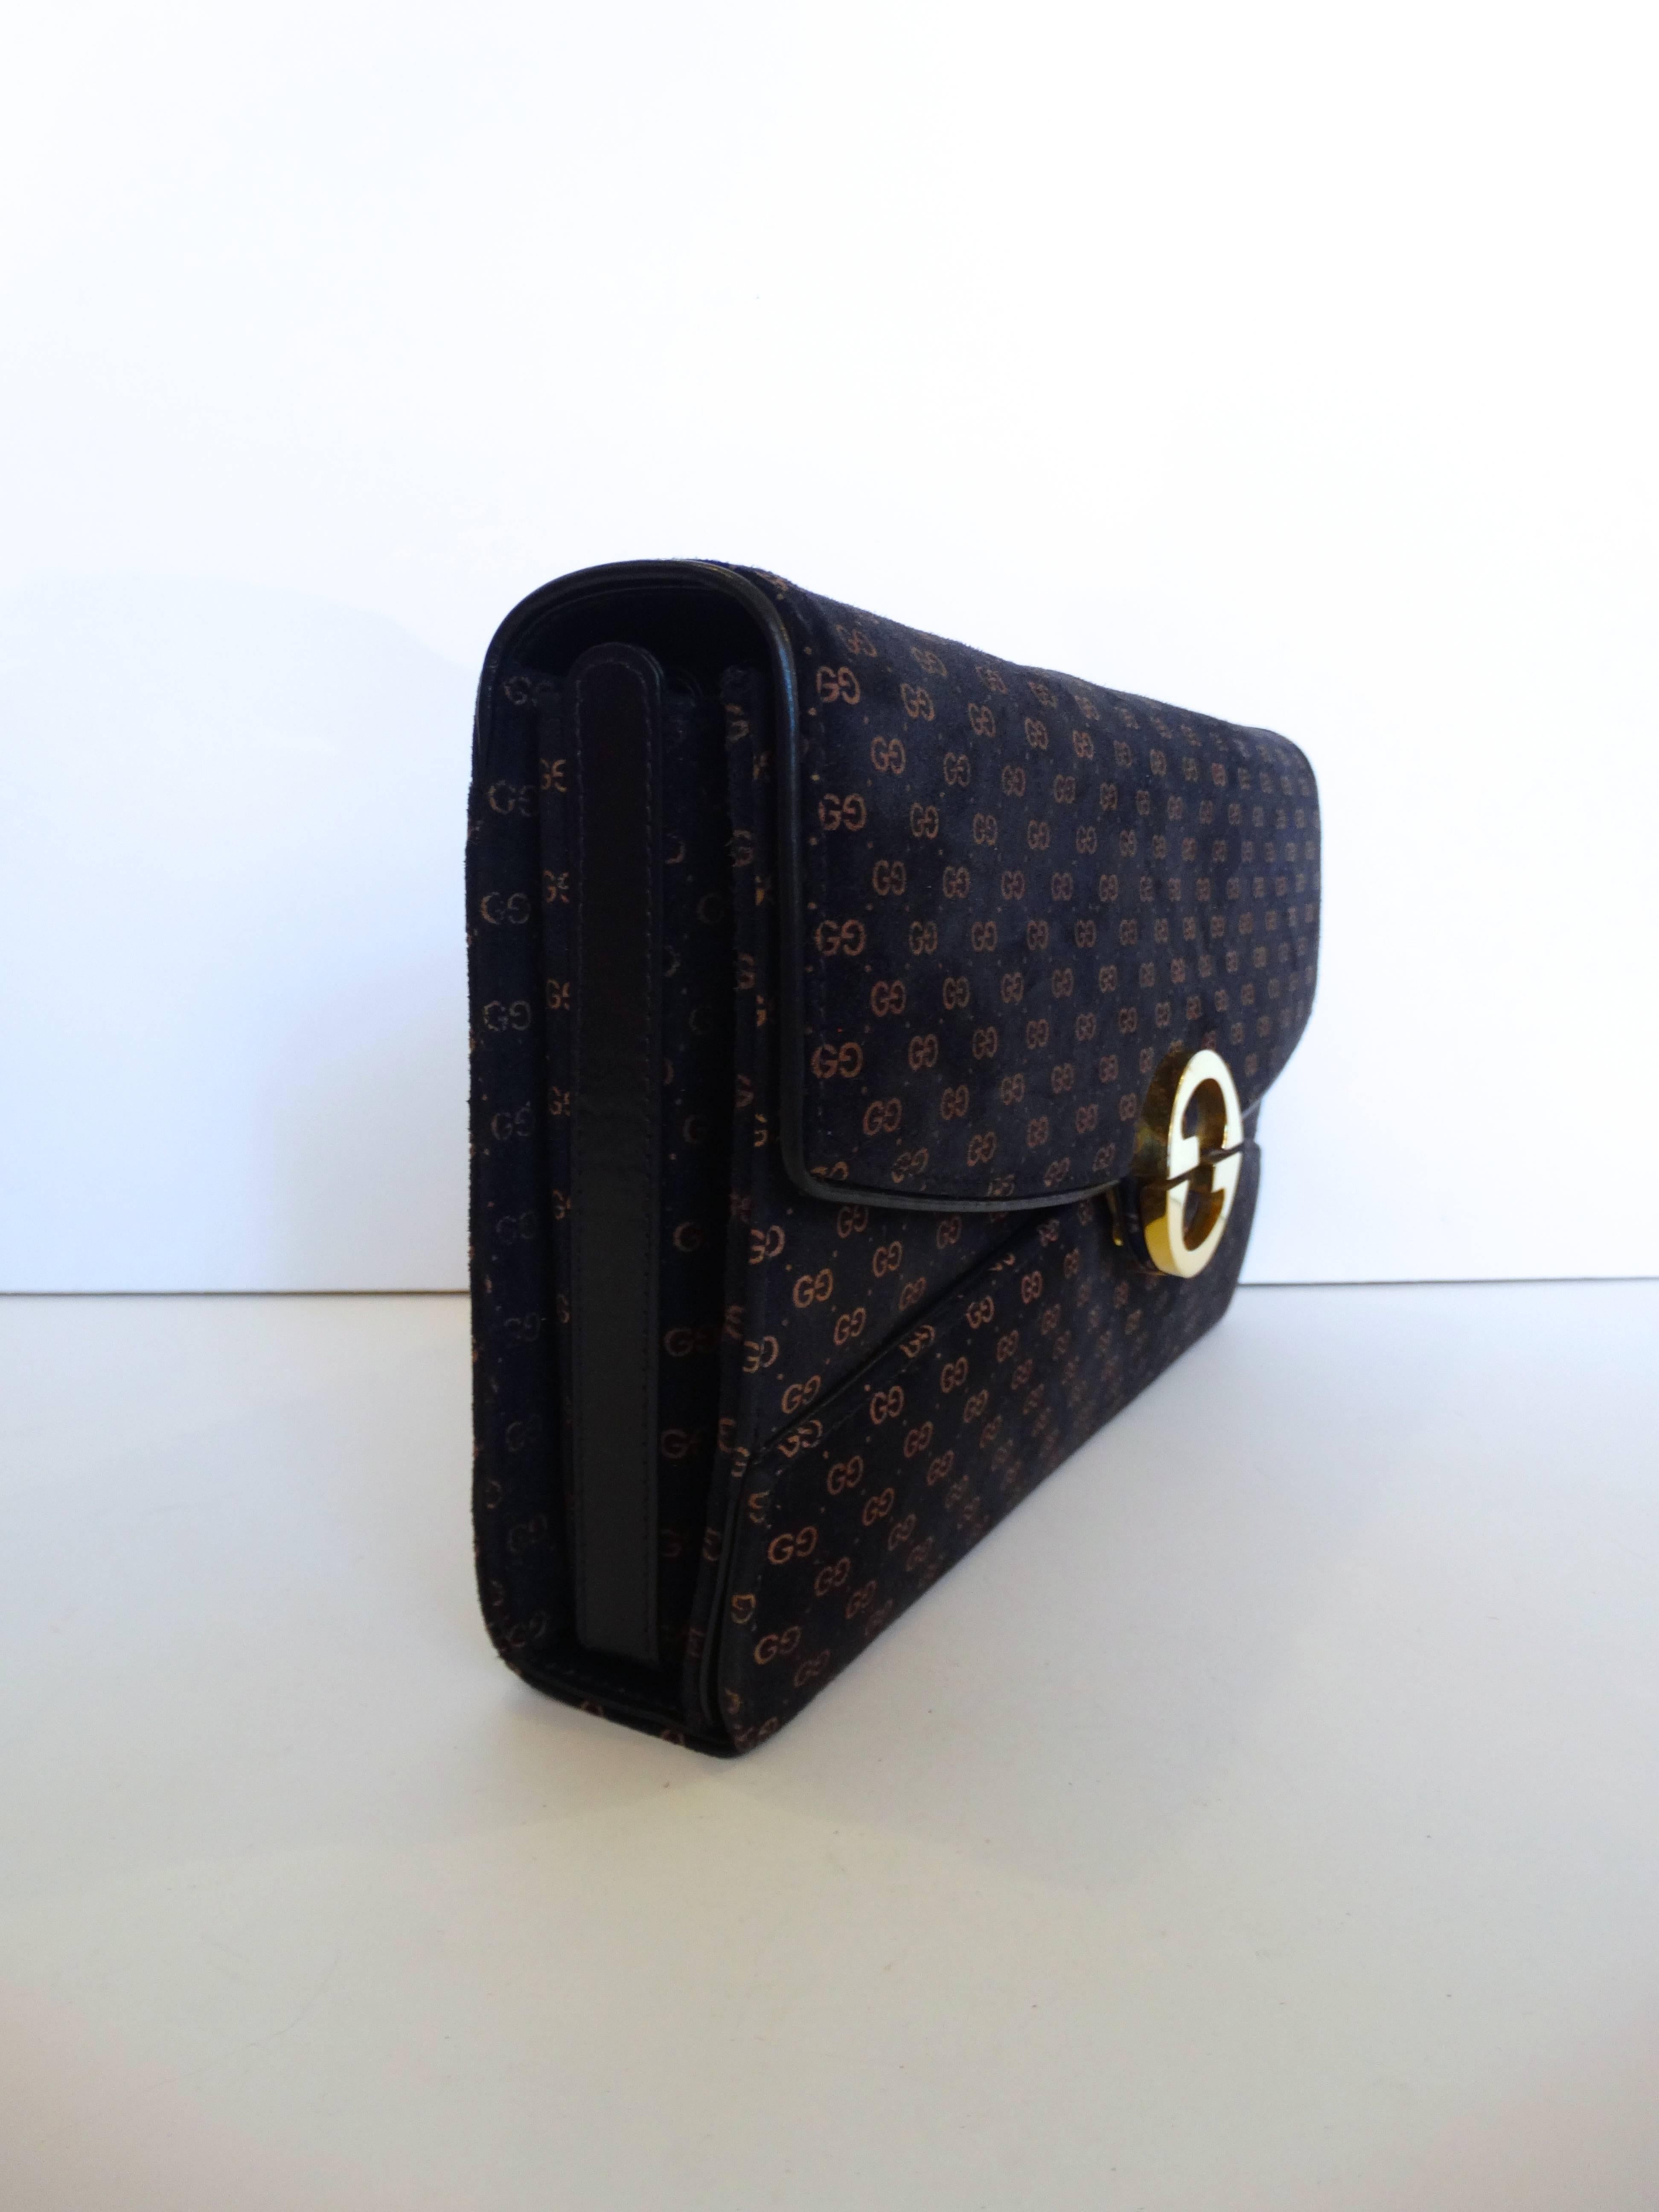 The classic Gucci monogram bag! Black and brown monogram all over print on velveteen fabric. Black leather piping and interior. “GG” gold metallic clasp- push from the top and bottom to pop open the bag. Removable strap. Unused Made in Italy 

W: